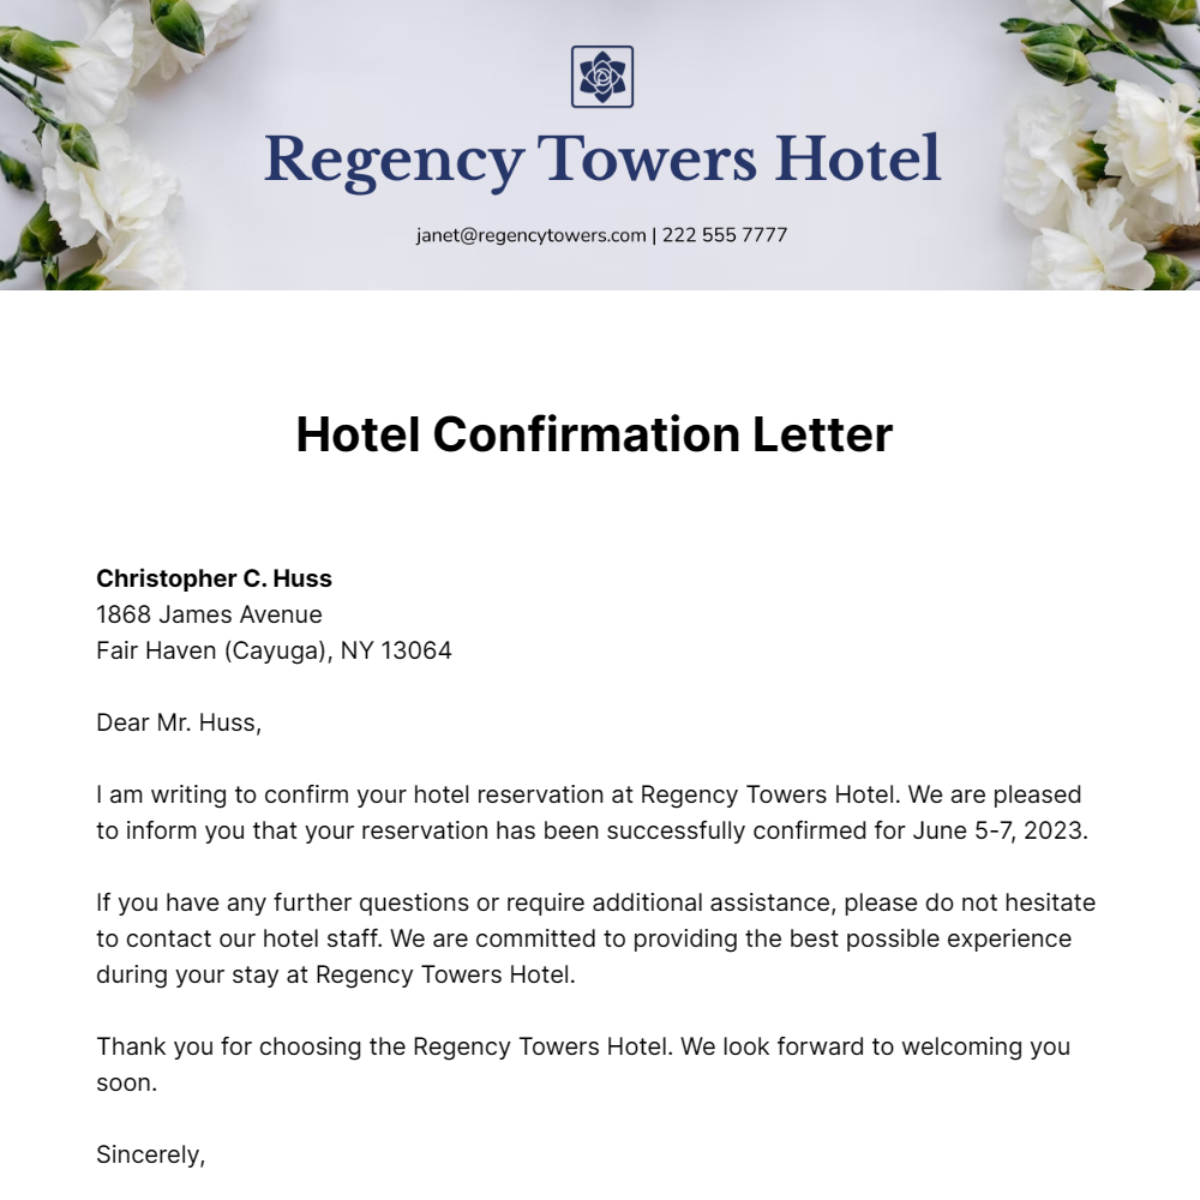 Hotel Confirmation Letter Template